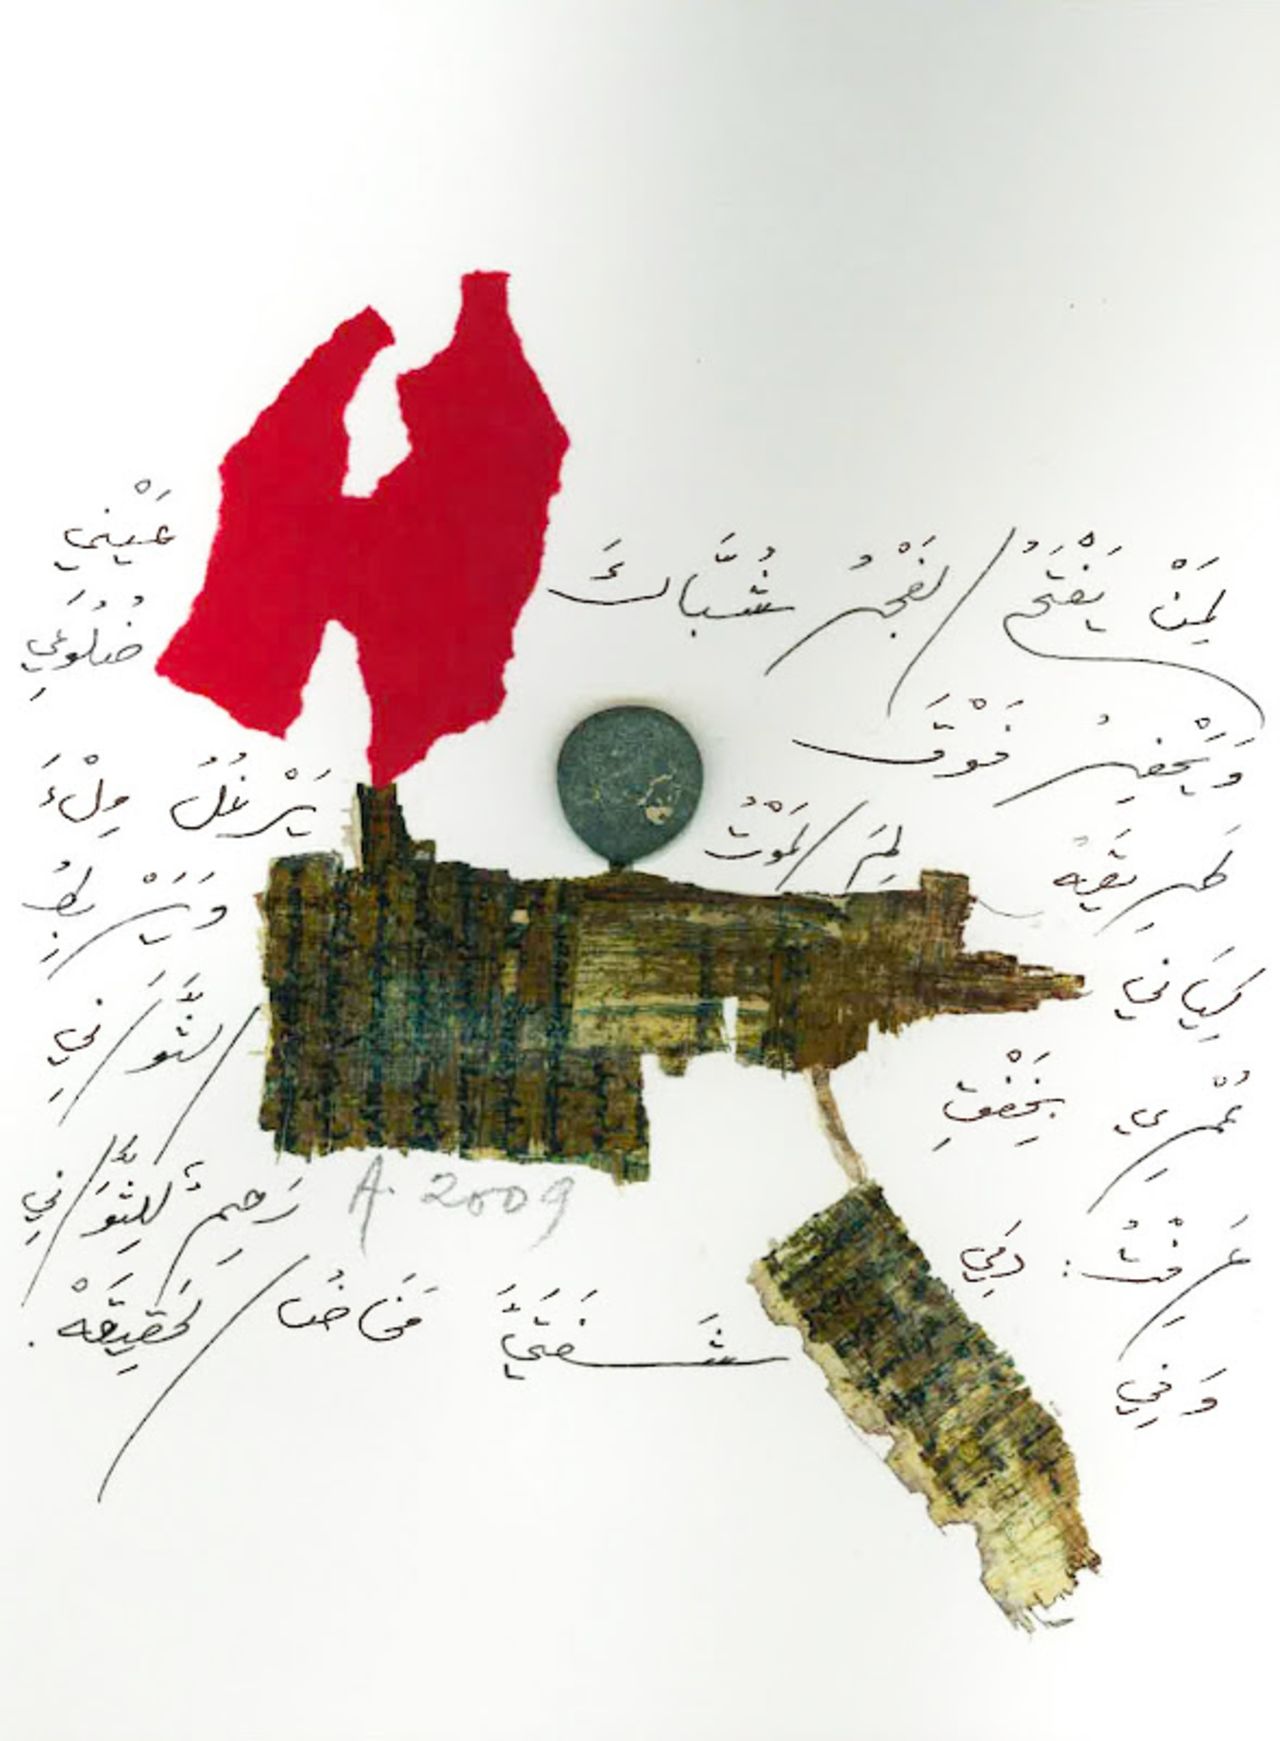 Adonis makes collages with random passages of Arabic poetry and diverse materials including rags, yarn, documents and used cans.